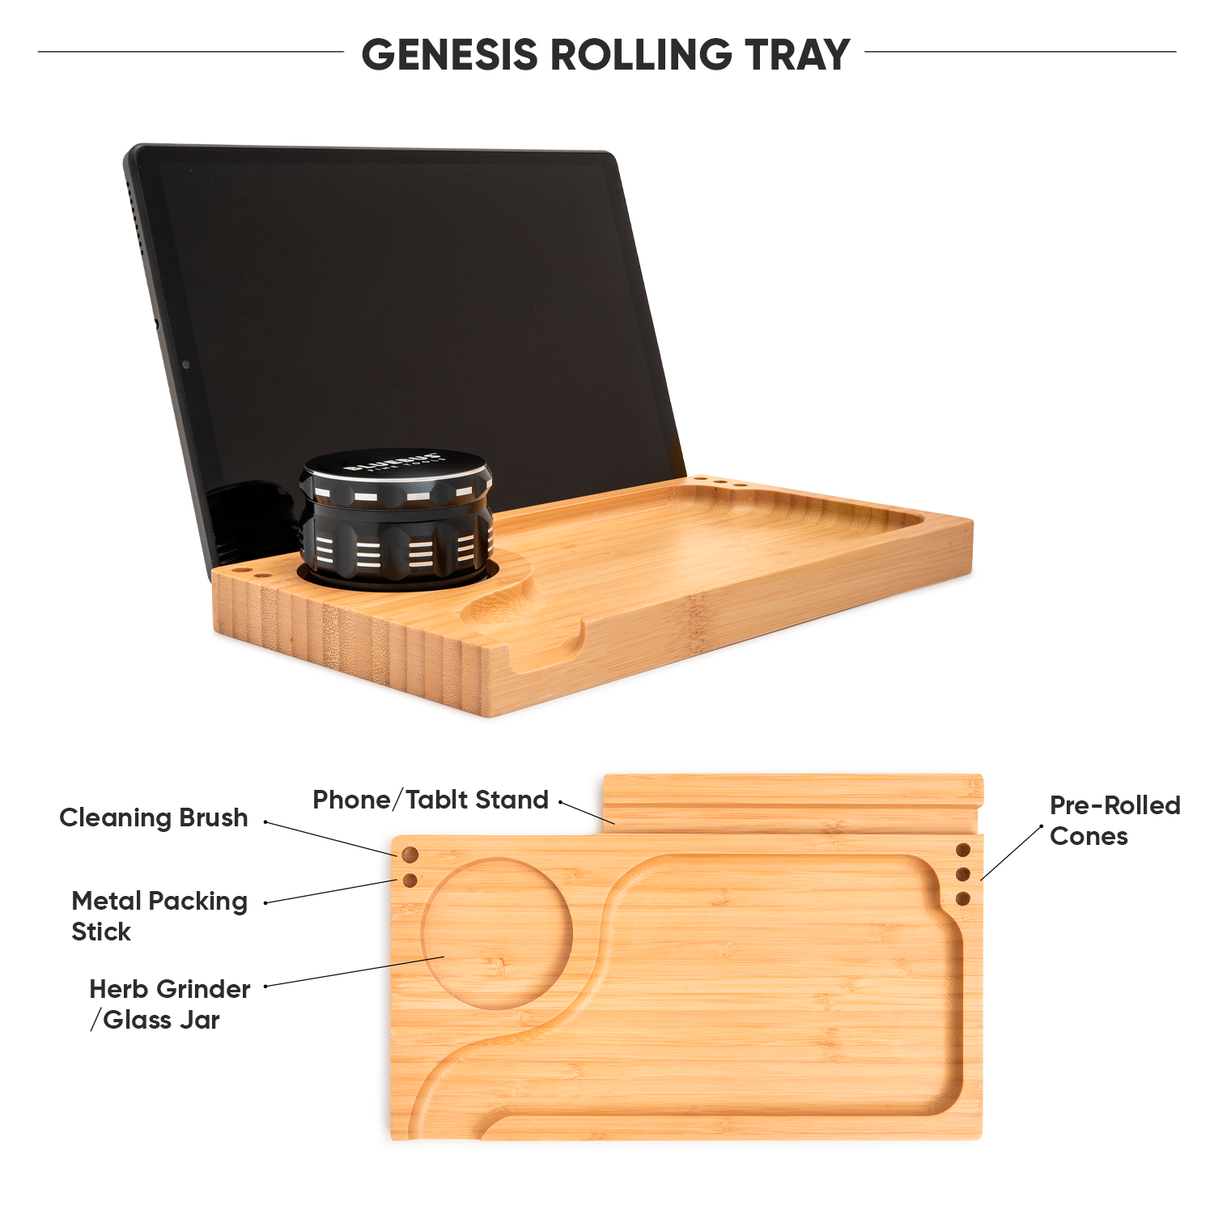 GENESIS Storage Stash Box by Blue Bus Fine Tools with compartments and accessories